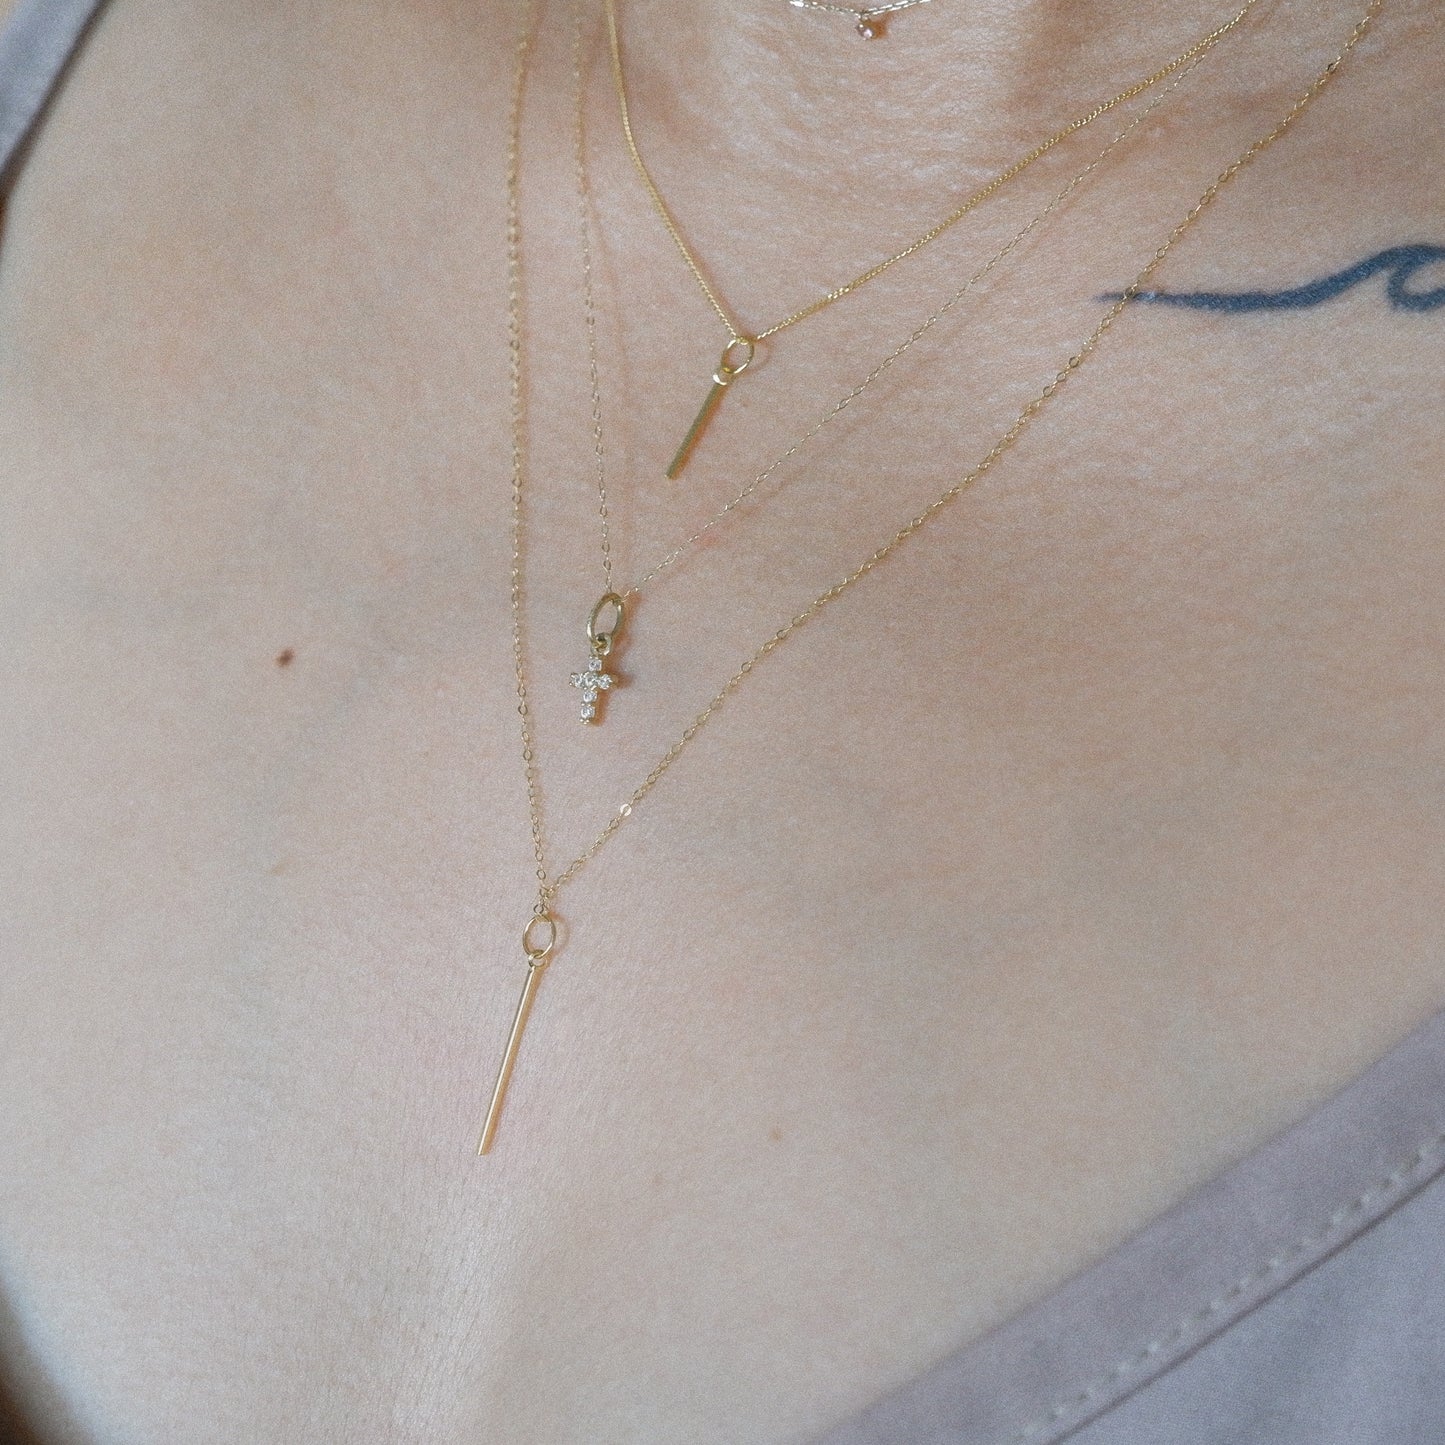 The Tiny Bar Pendant in Solid Gold